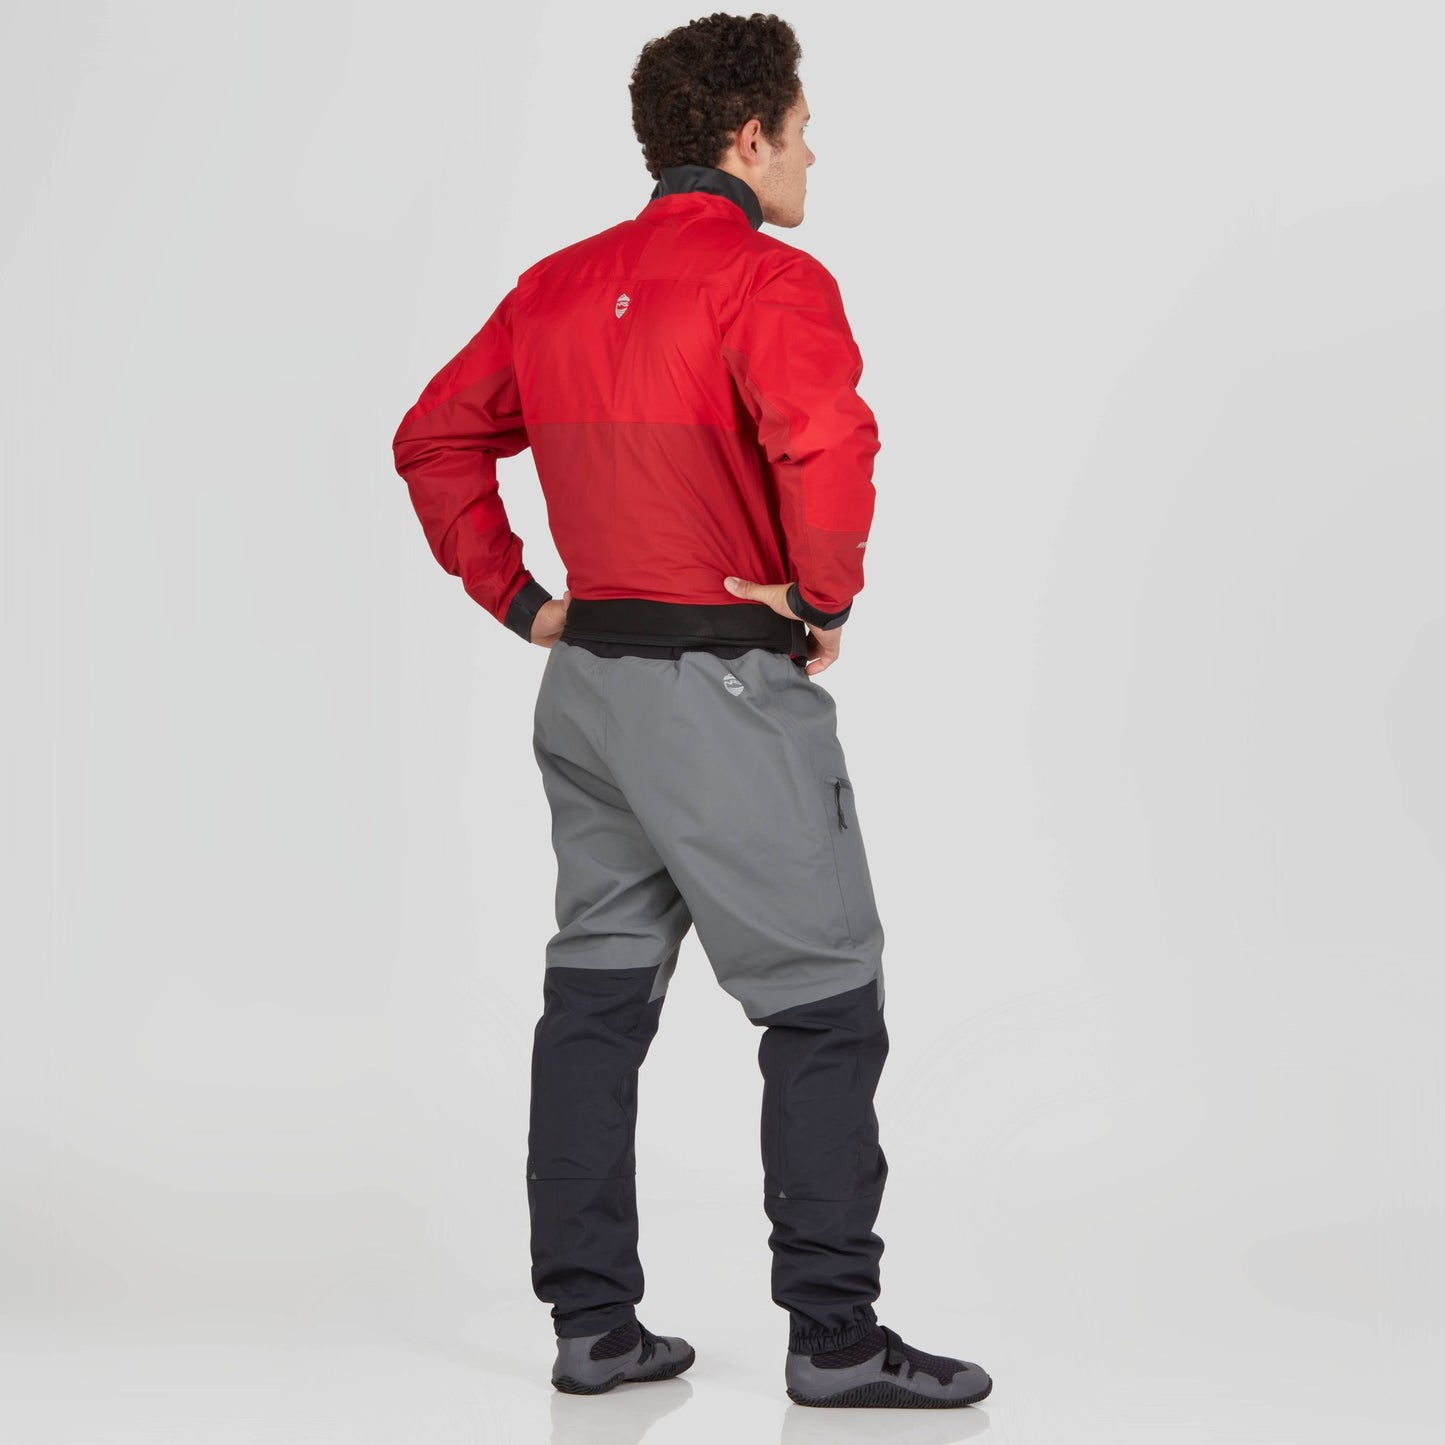 NRS Freefall Dry Pants, hombre